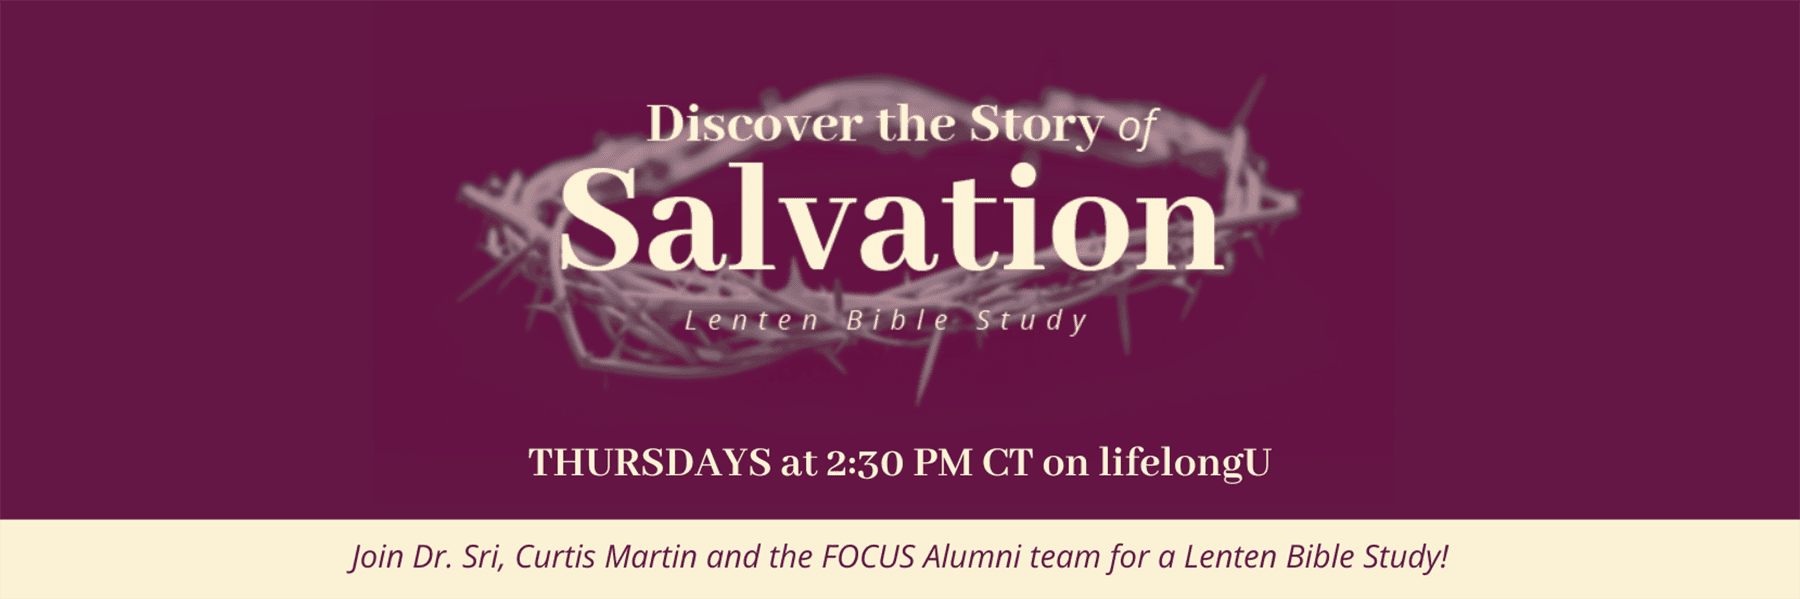 Discover the Story of Salvation